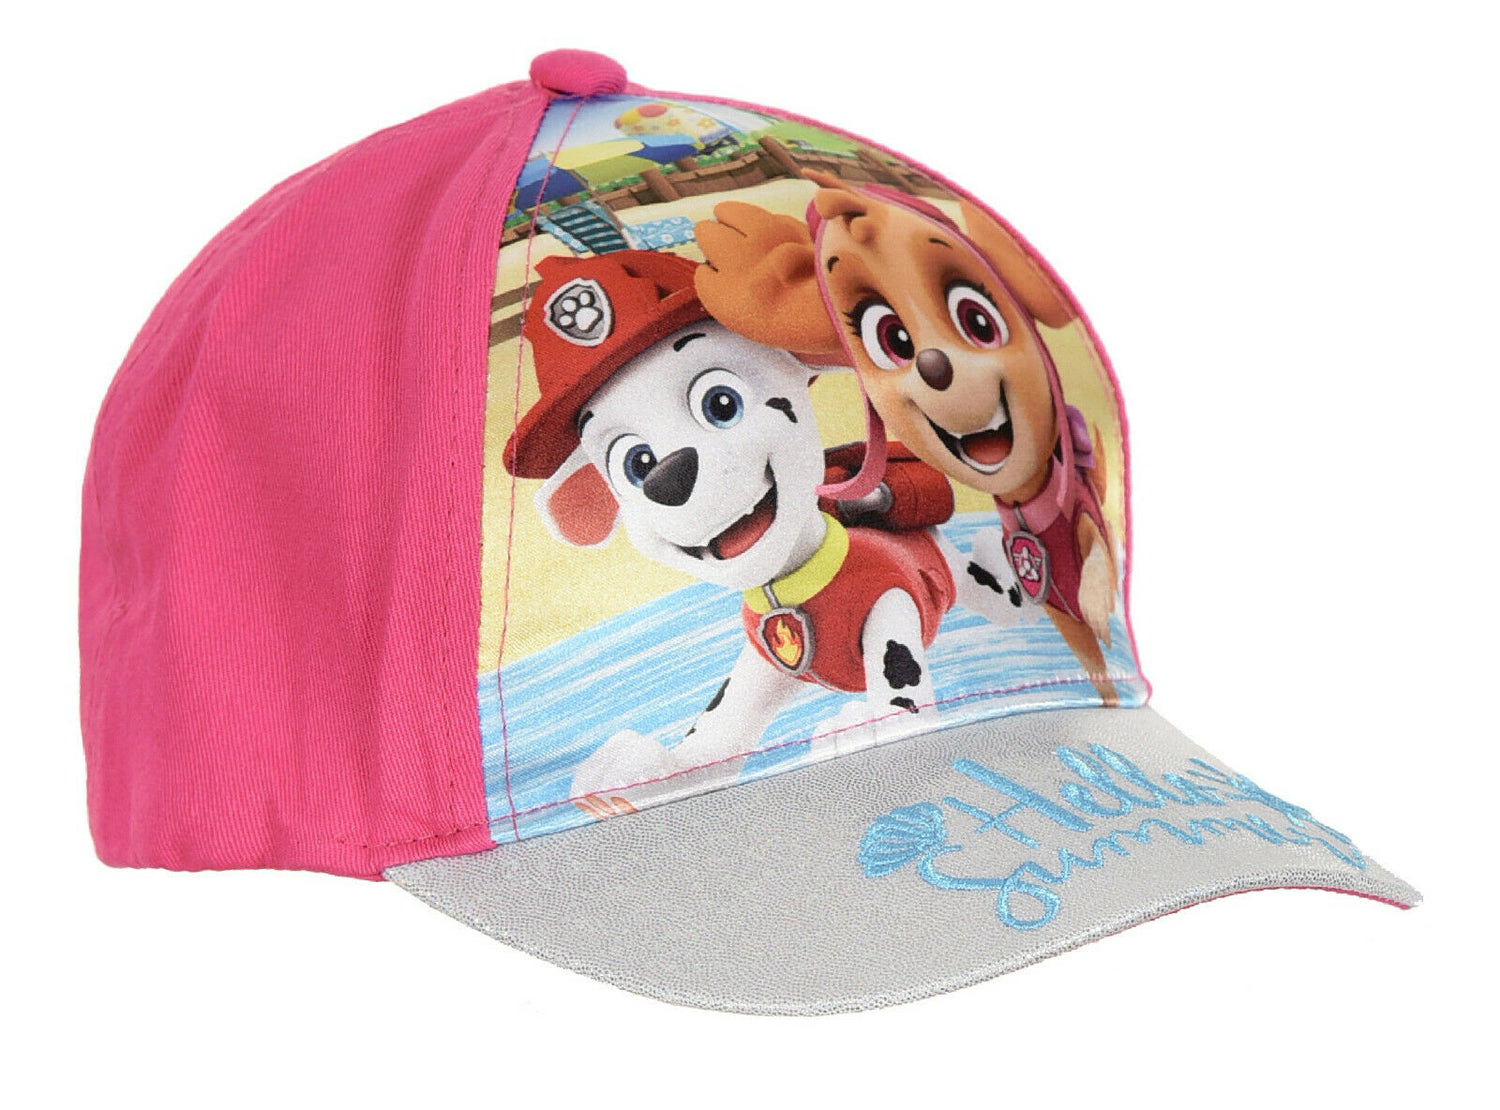 Children's Paw Patrol baseball caps Perfect for the summer months Available in 2-4 (52cms), 4-8 (54cms) Multiple designs available 100% cotton Official merchandise